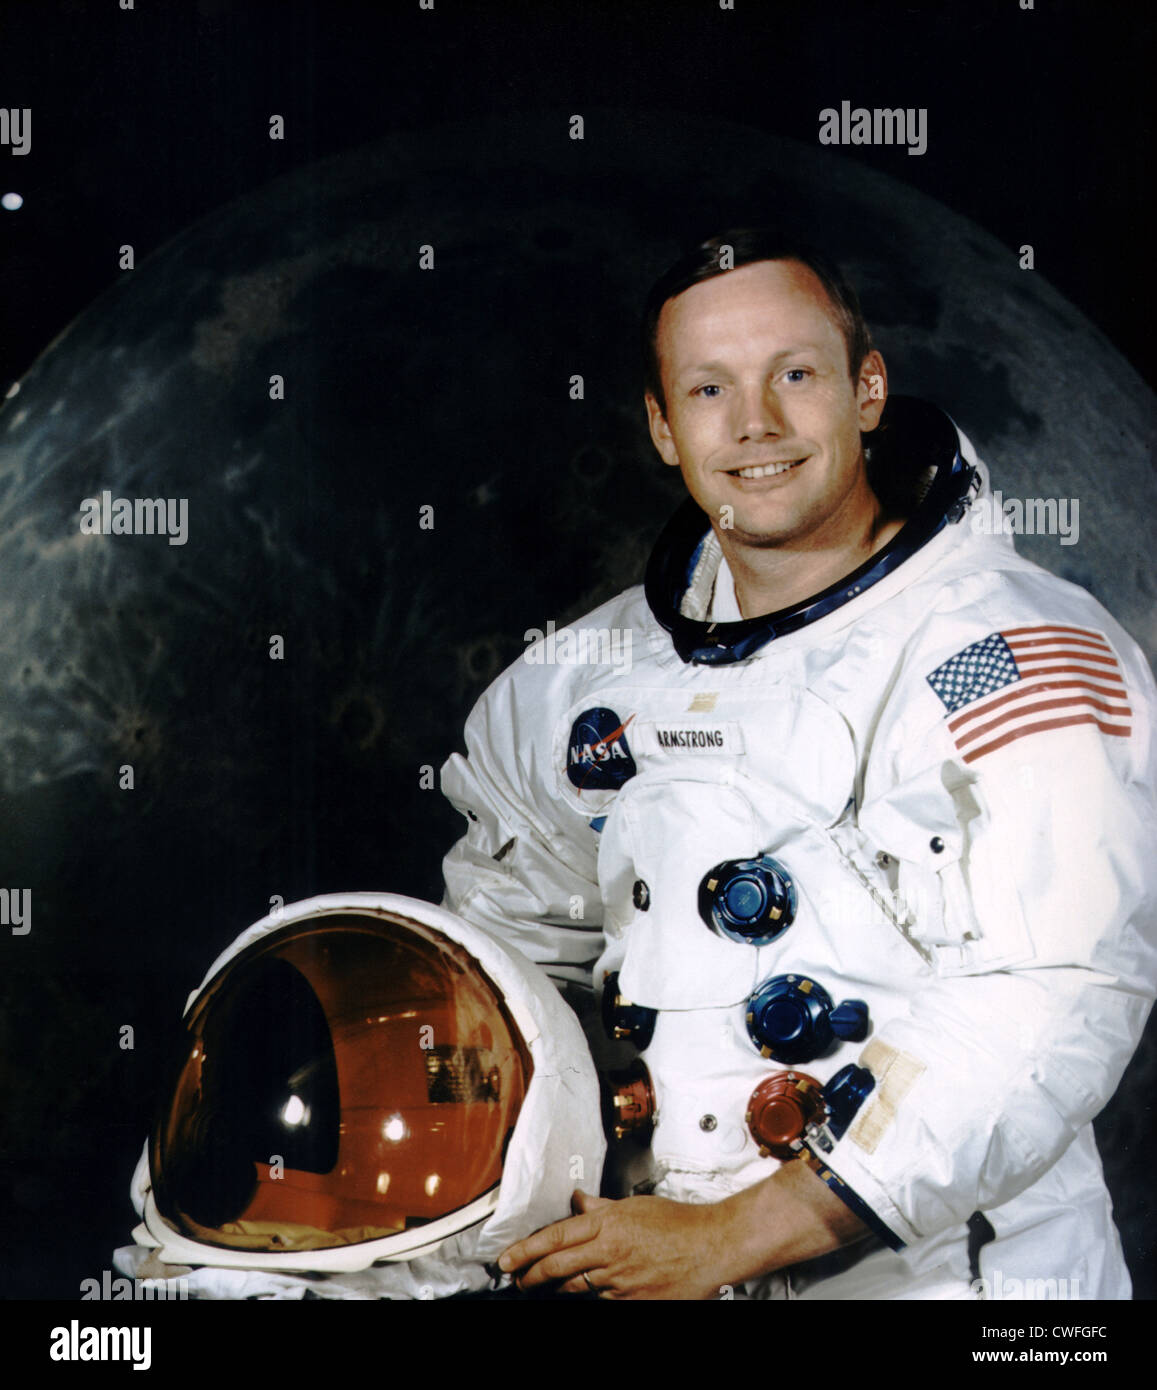 Portrait of Astronaut Neil Armstrong, the first man to walk on the moon, ahead of his historic Apollo 11 mission in July 1969. Stock Photo